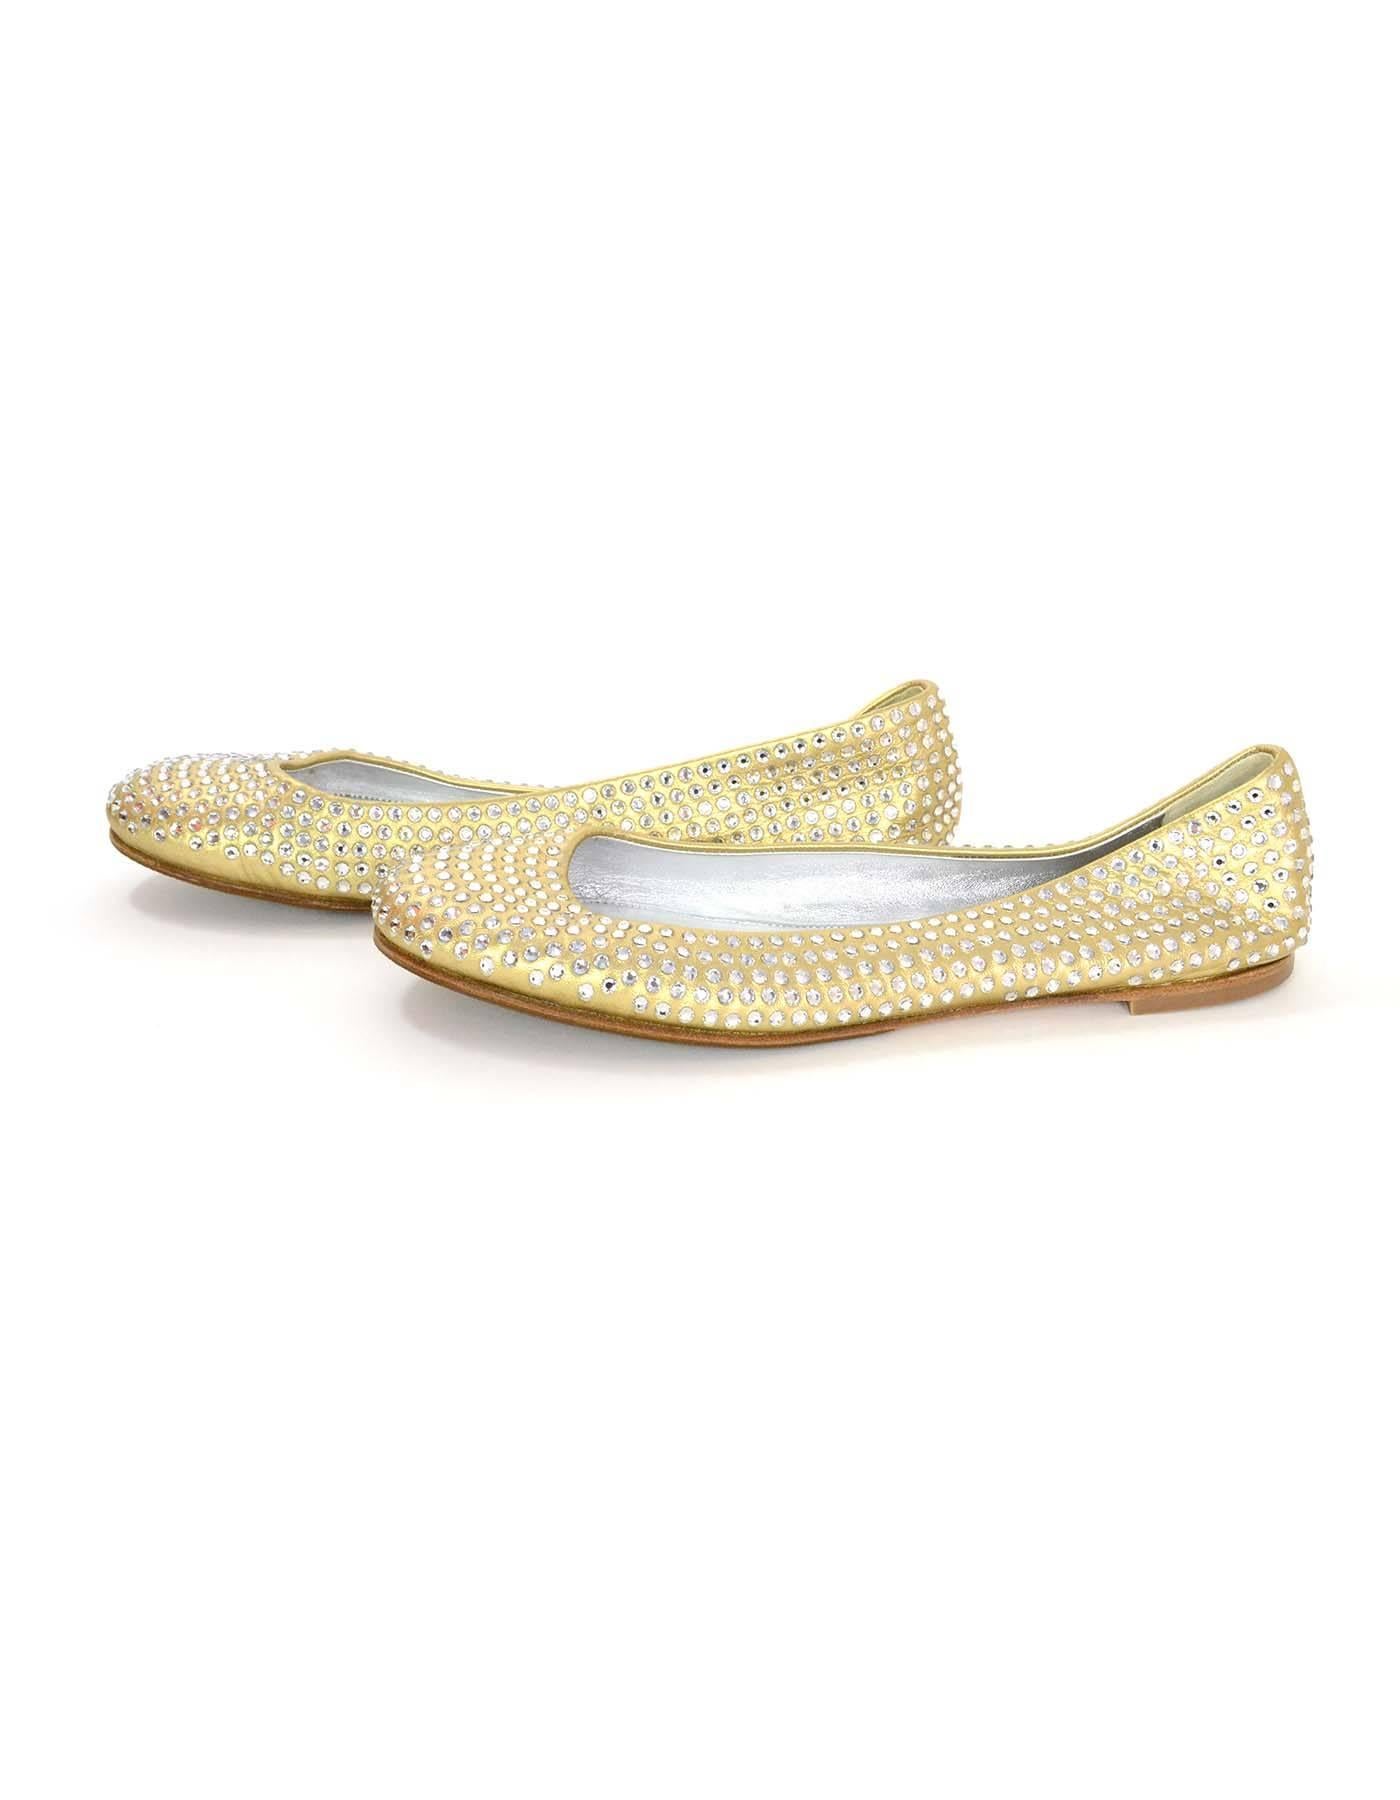 Giuseppe Zanotti Metallic Gold Leather & Crystal Embellished Flats 
Features Swarovski crystals throughout
Made In: Italy
Color: Metallic gold
Materials: Leather and crystal
Closure/Opening: Slip on
Sole Stamp: Vero Cuoio Made in Italy